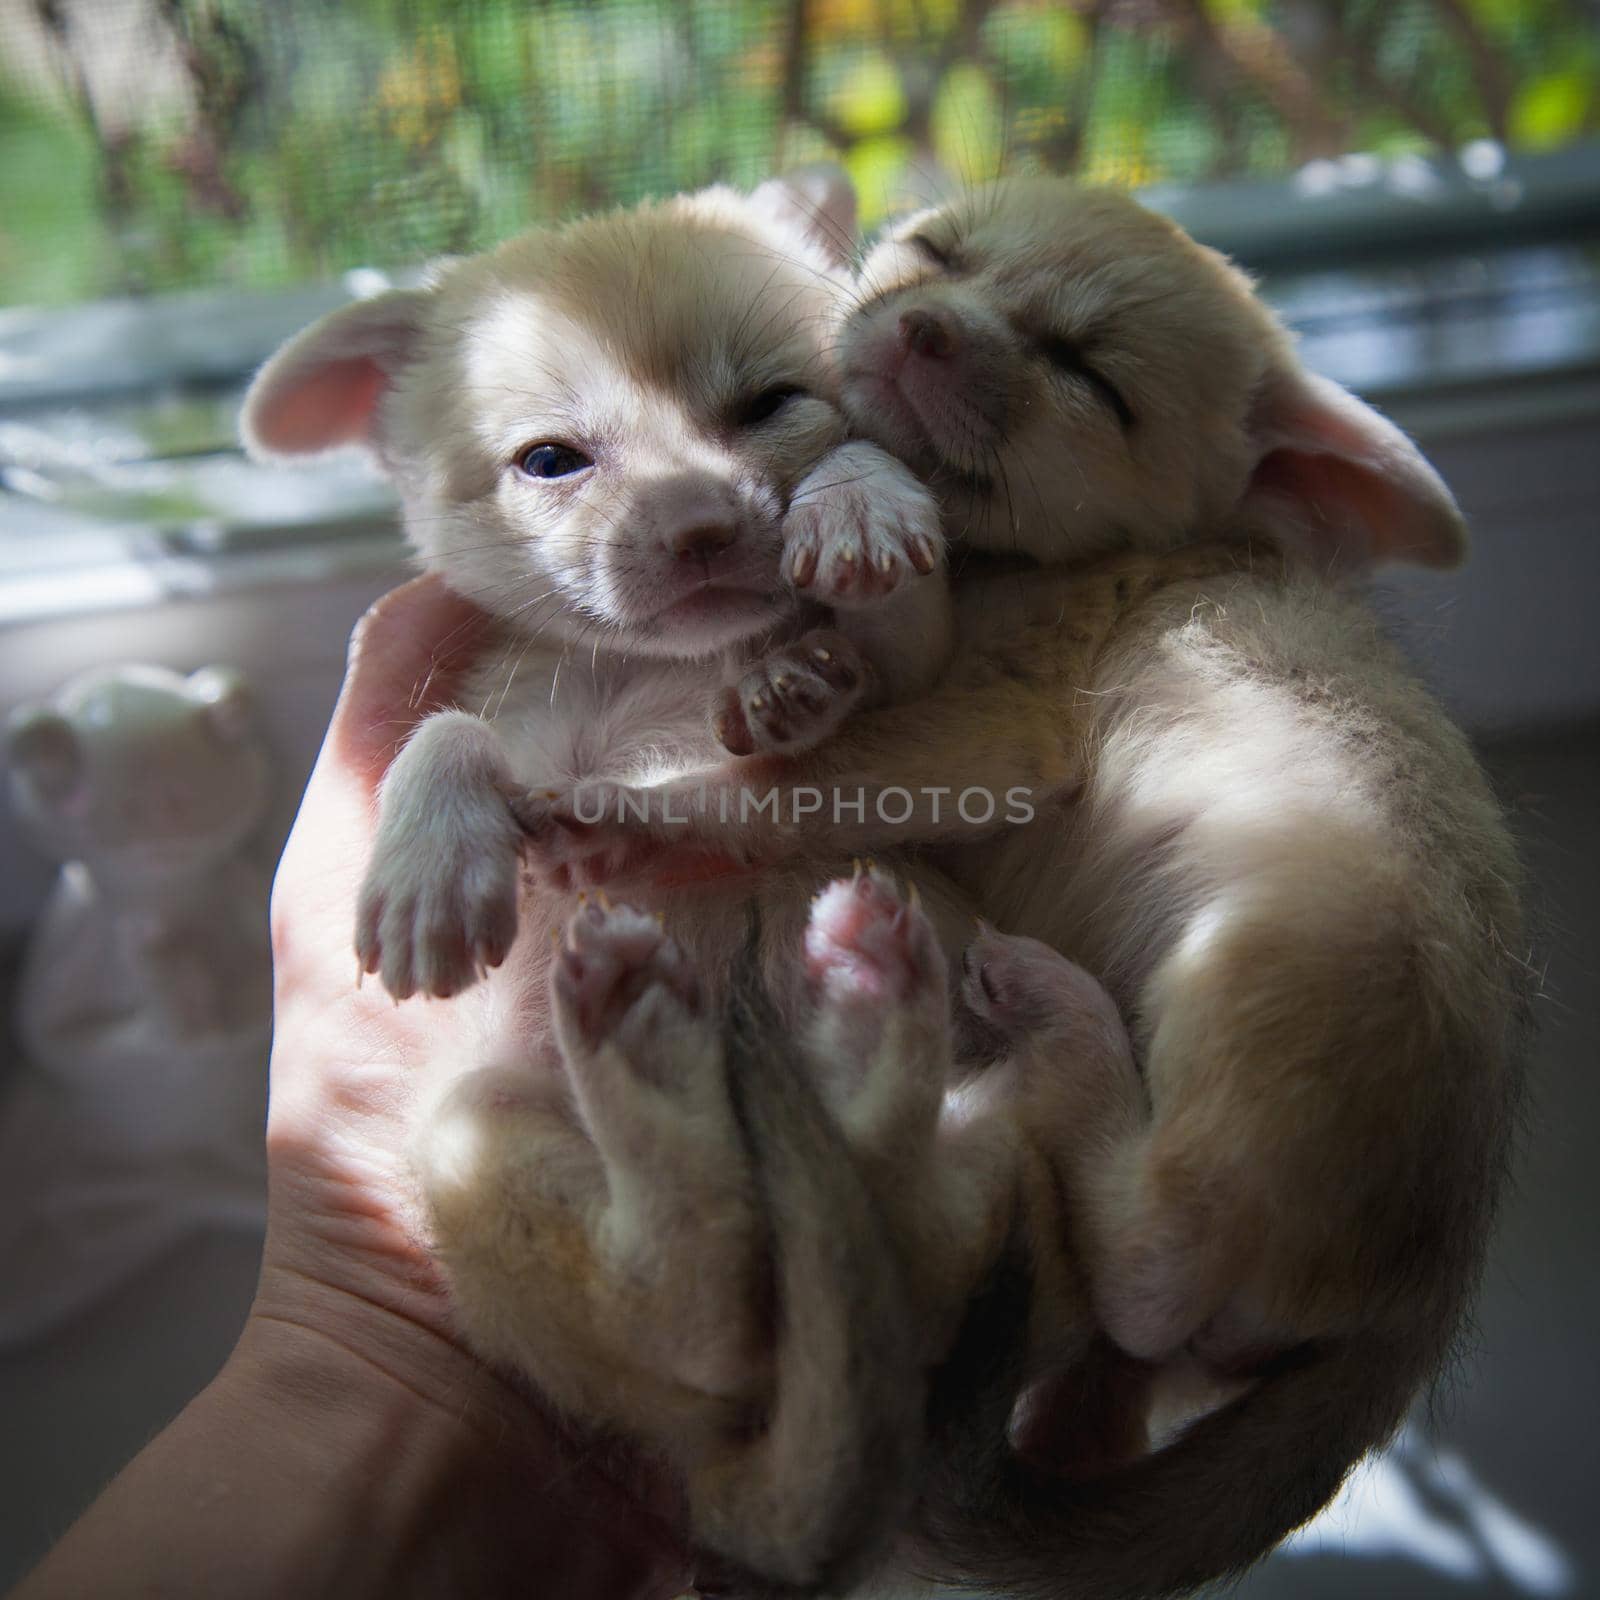 Two fennec foxes cub on human hands by RosaJay